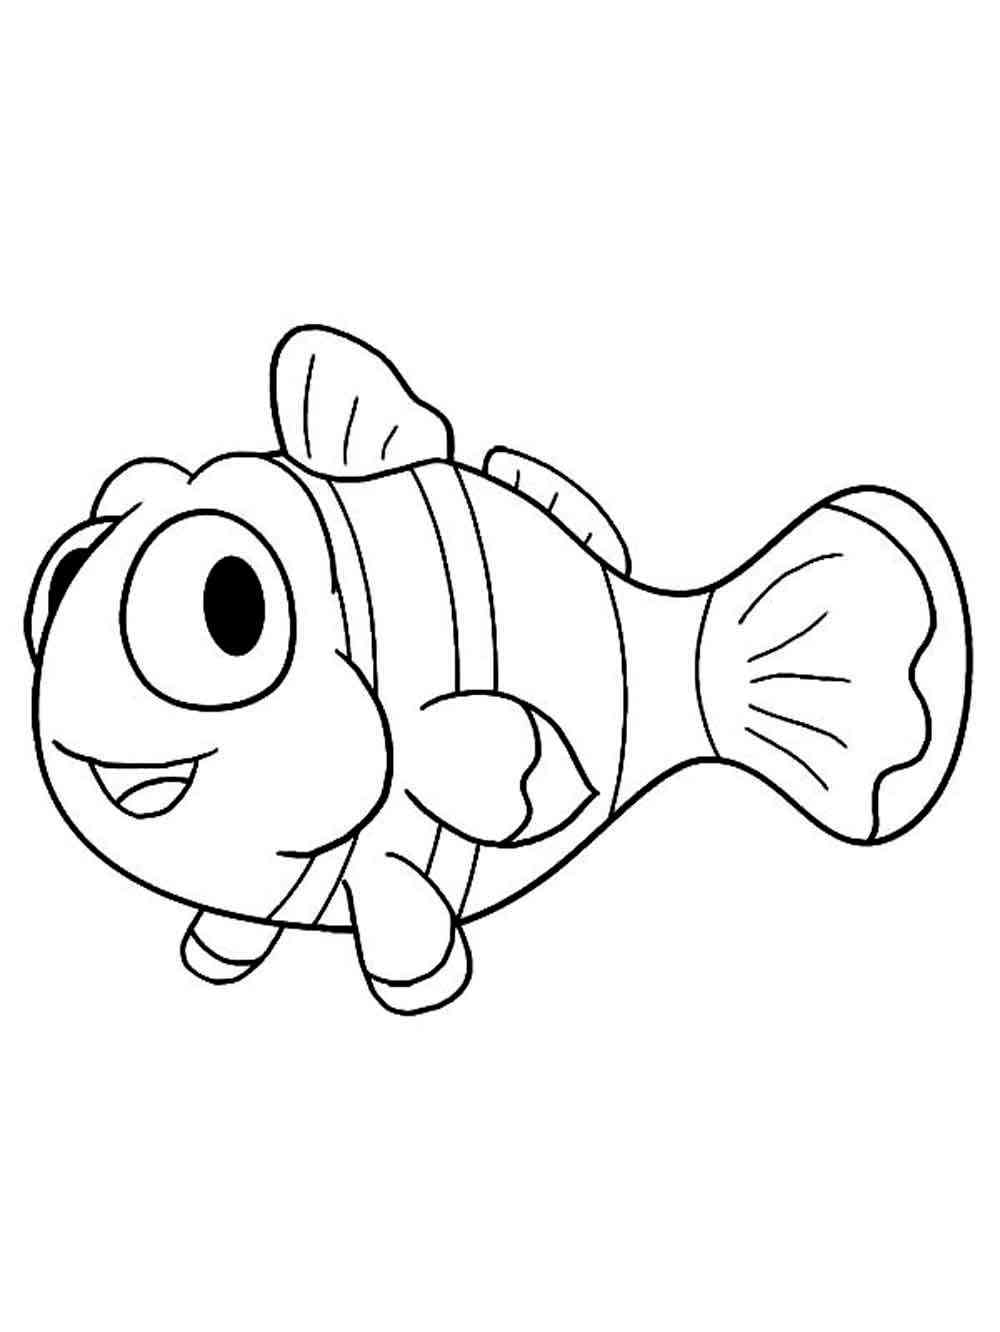 Clownfish 8 coloring page